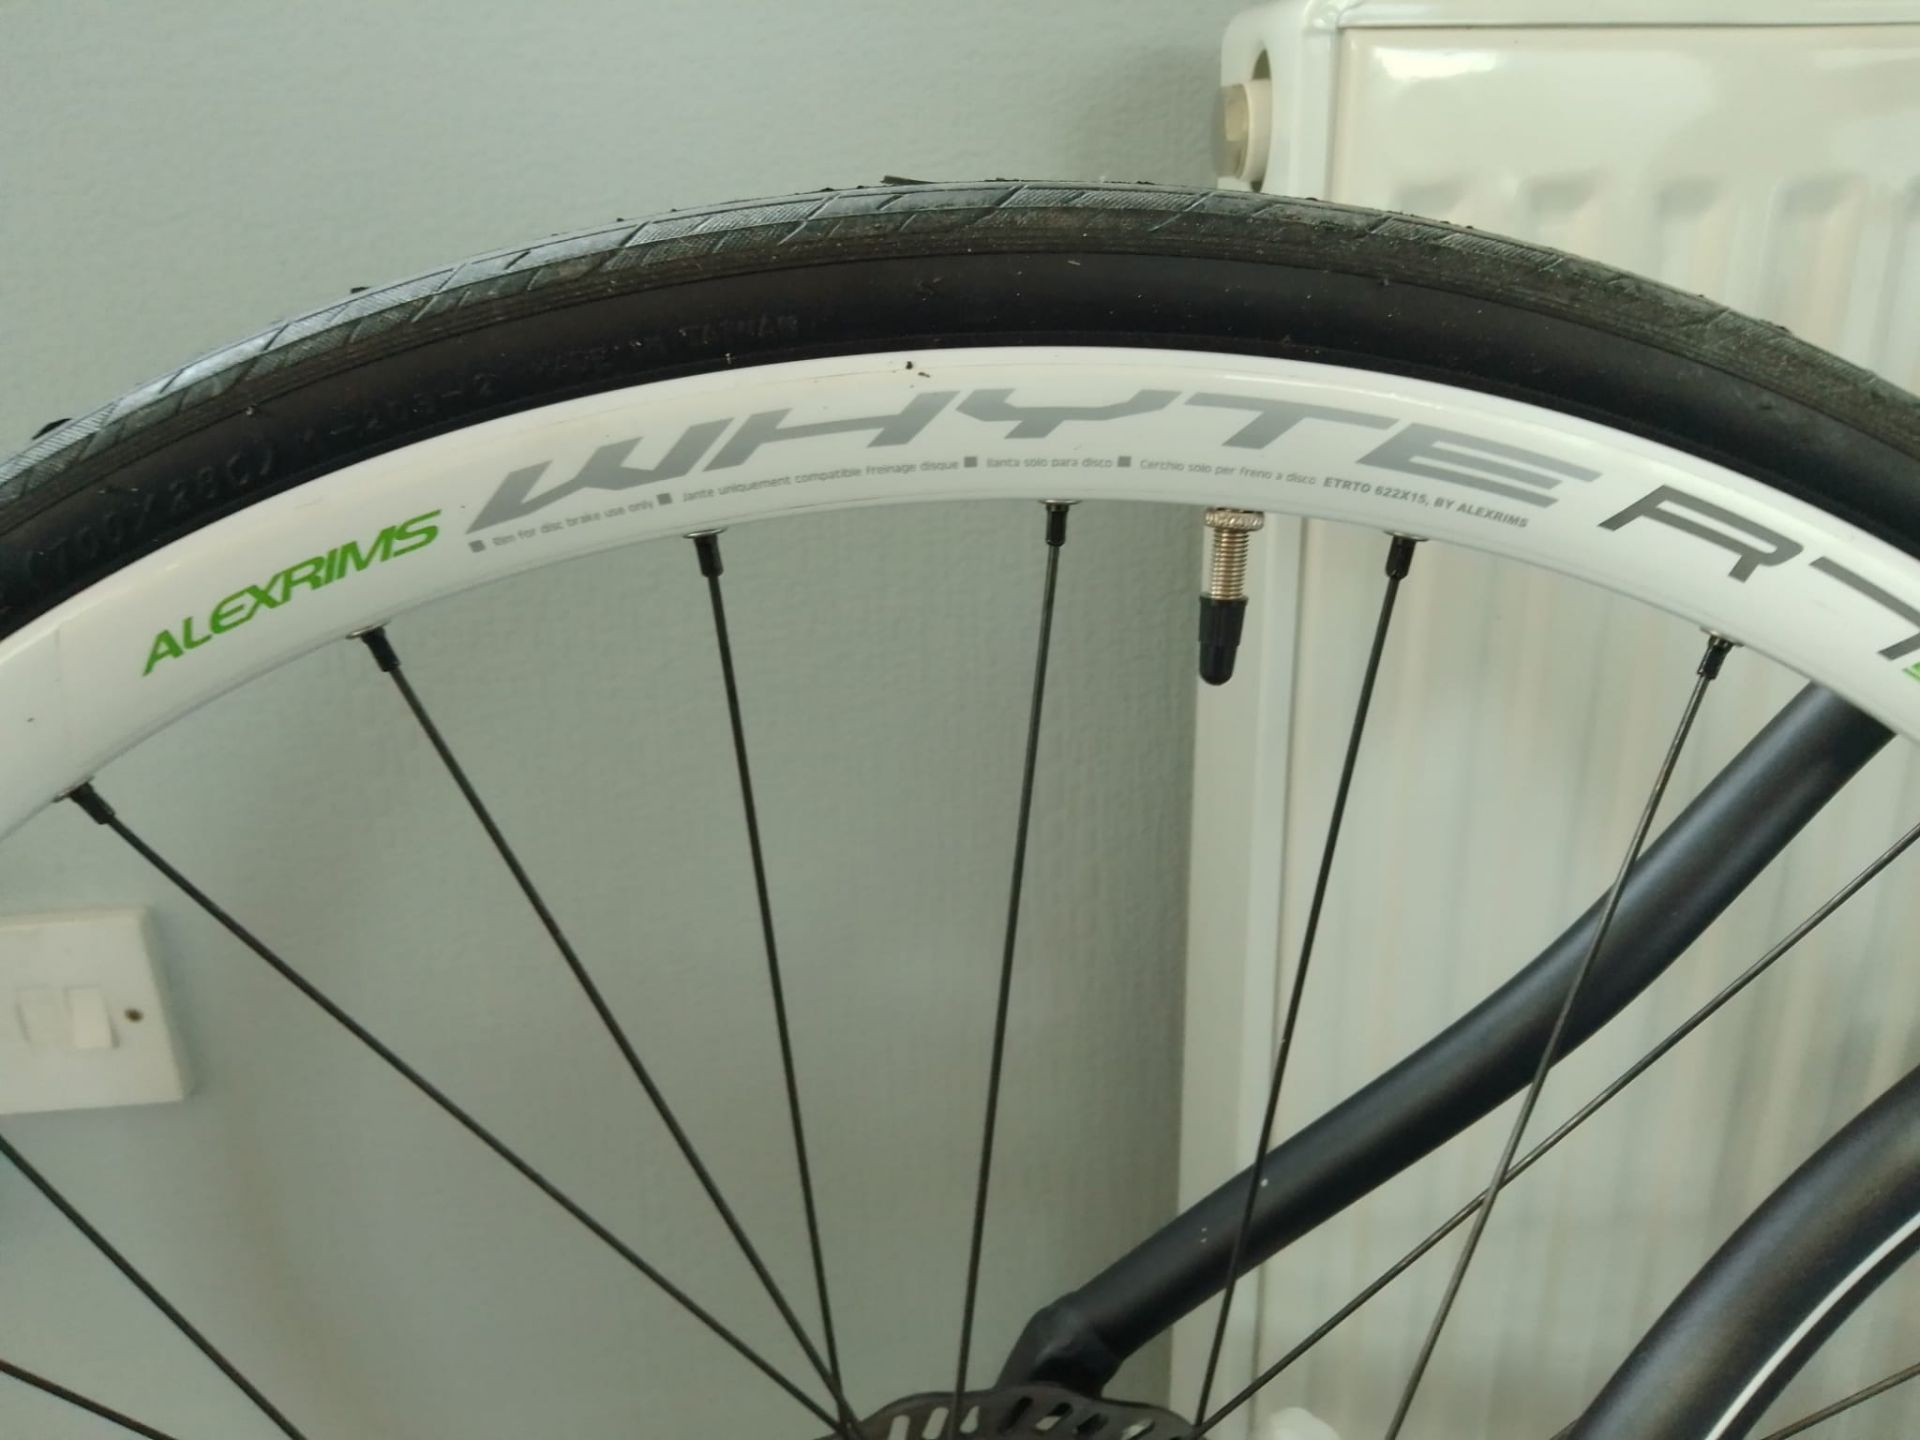 WHYTES COMMUTER SERIES BIKE, WITH R7 WHITE RIMS BRAND NEW, ULTRA LIGHTWEIGHT *NO VAT* - Image 3 of 4